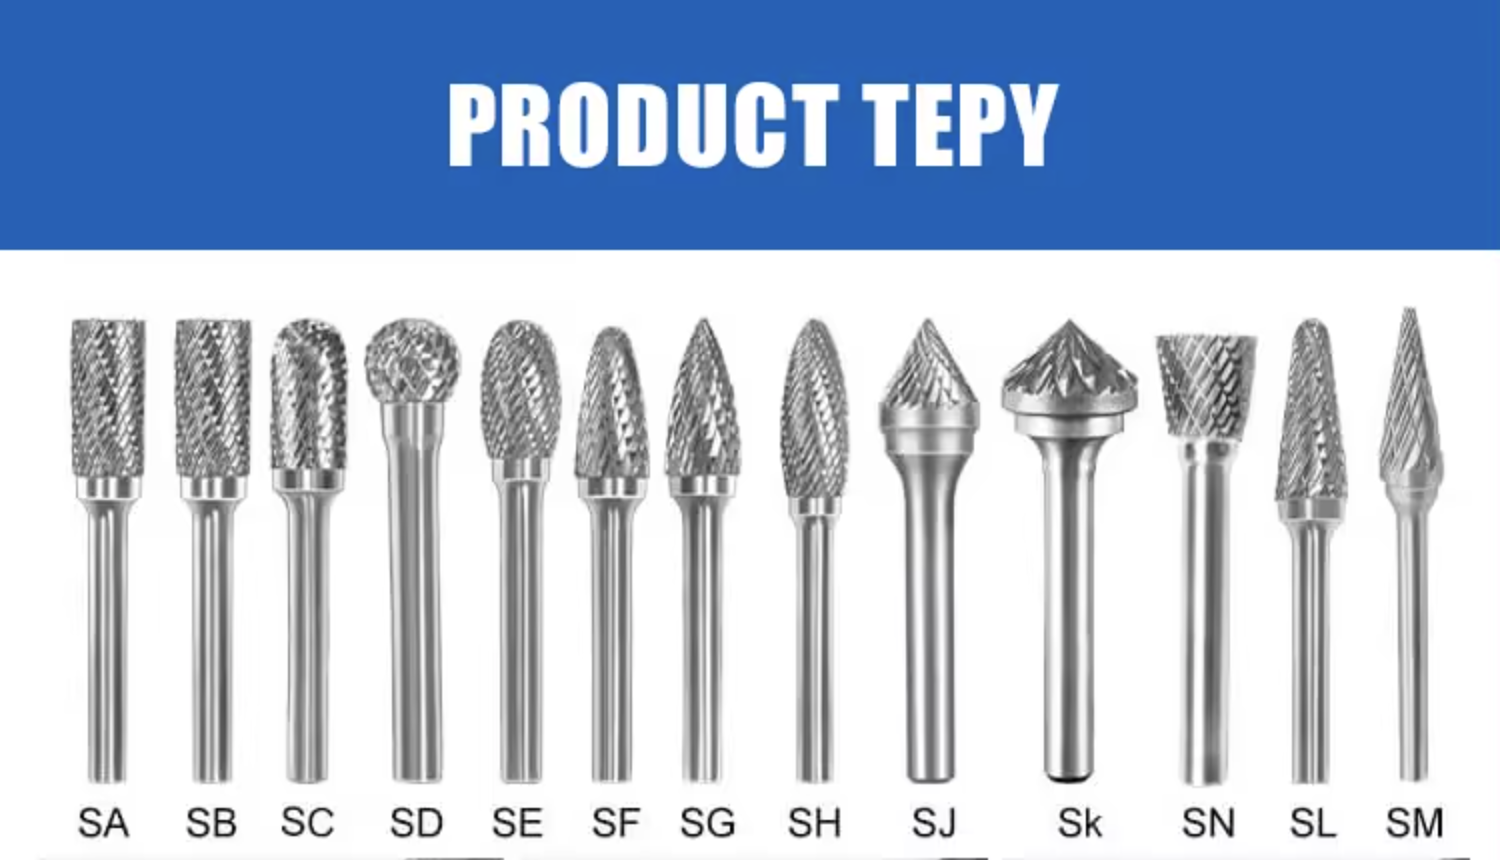 https://www.kedeltool.com/14-6mm-shank-tungsten-carbid-rotary-burrs-product/